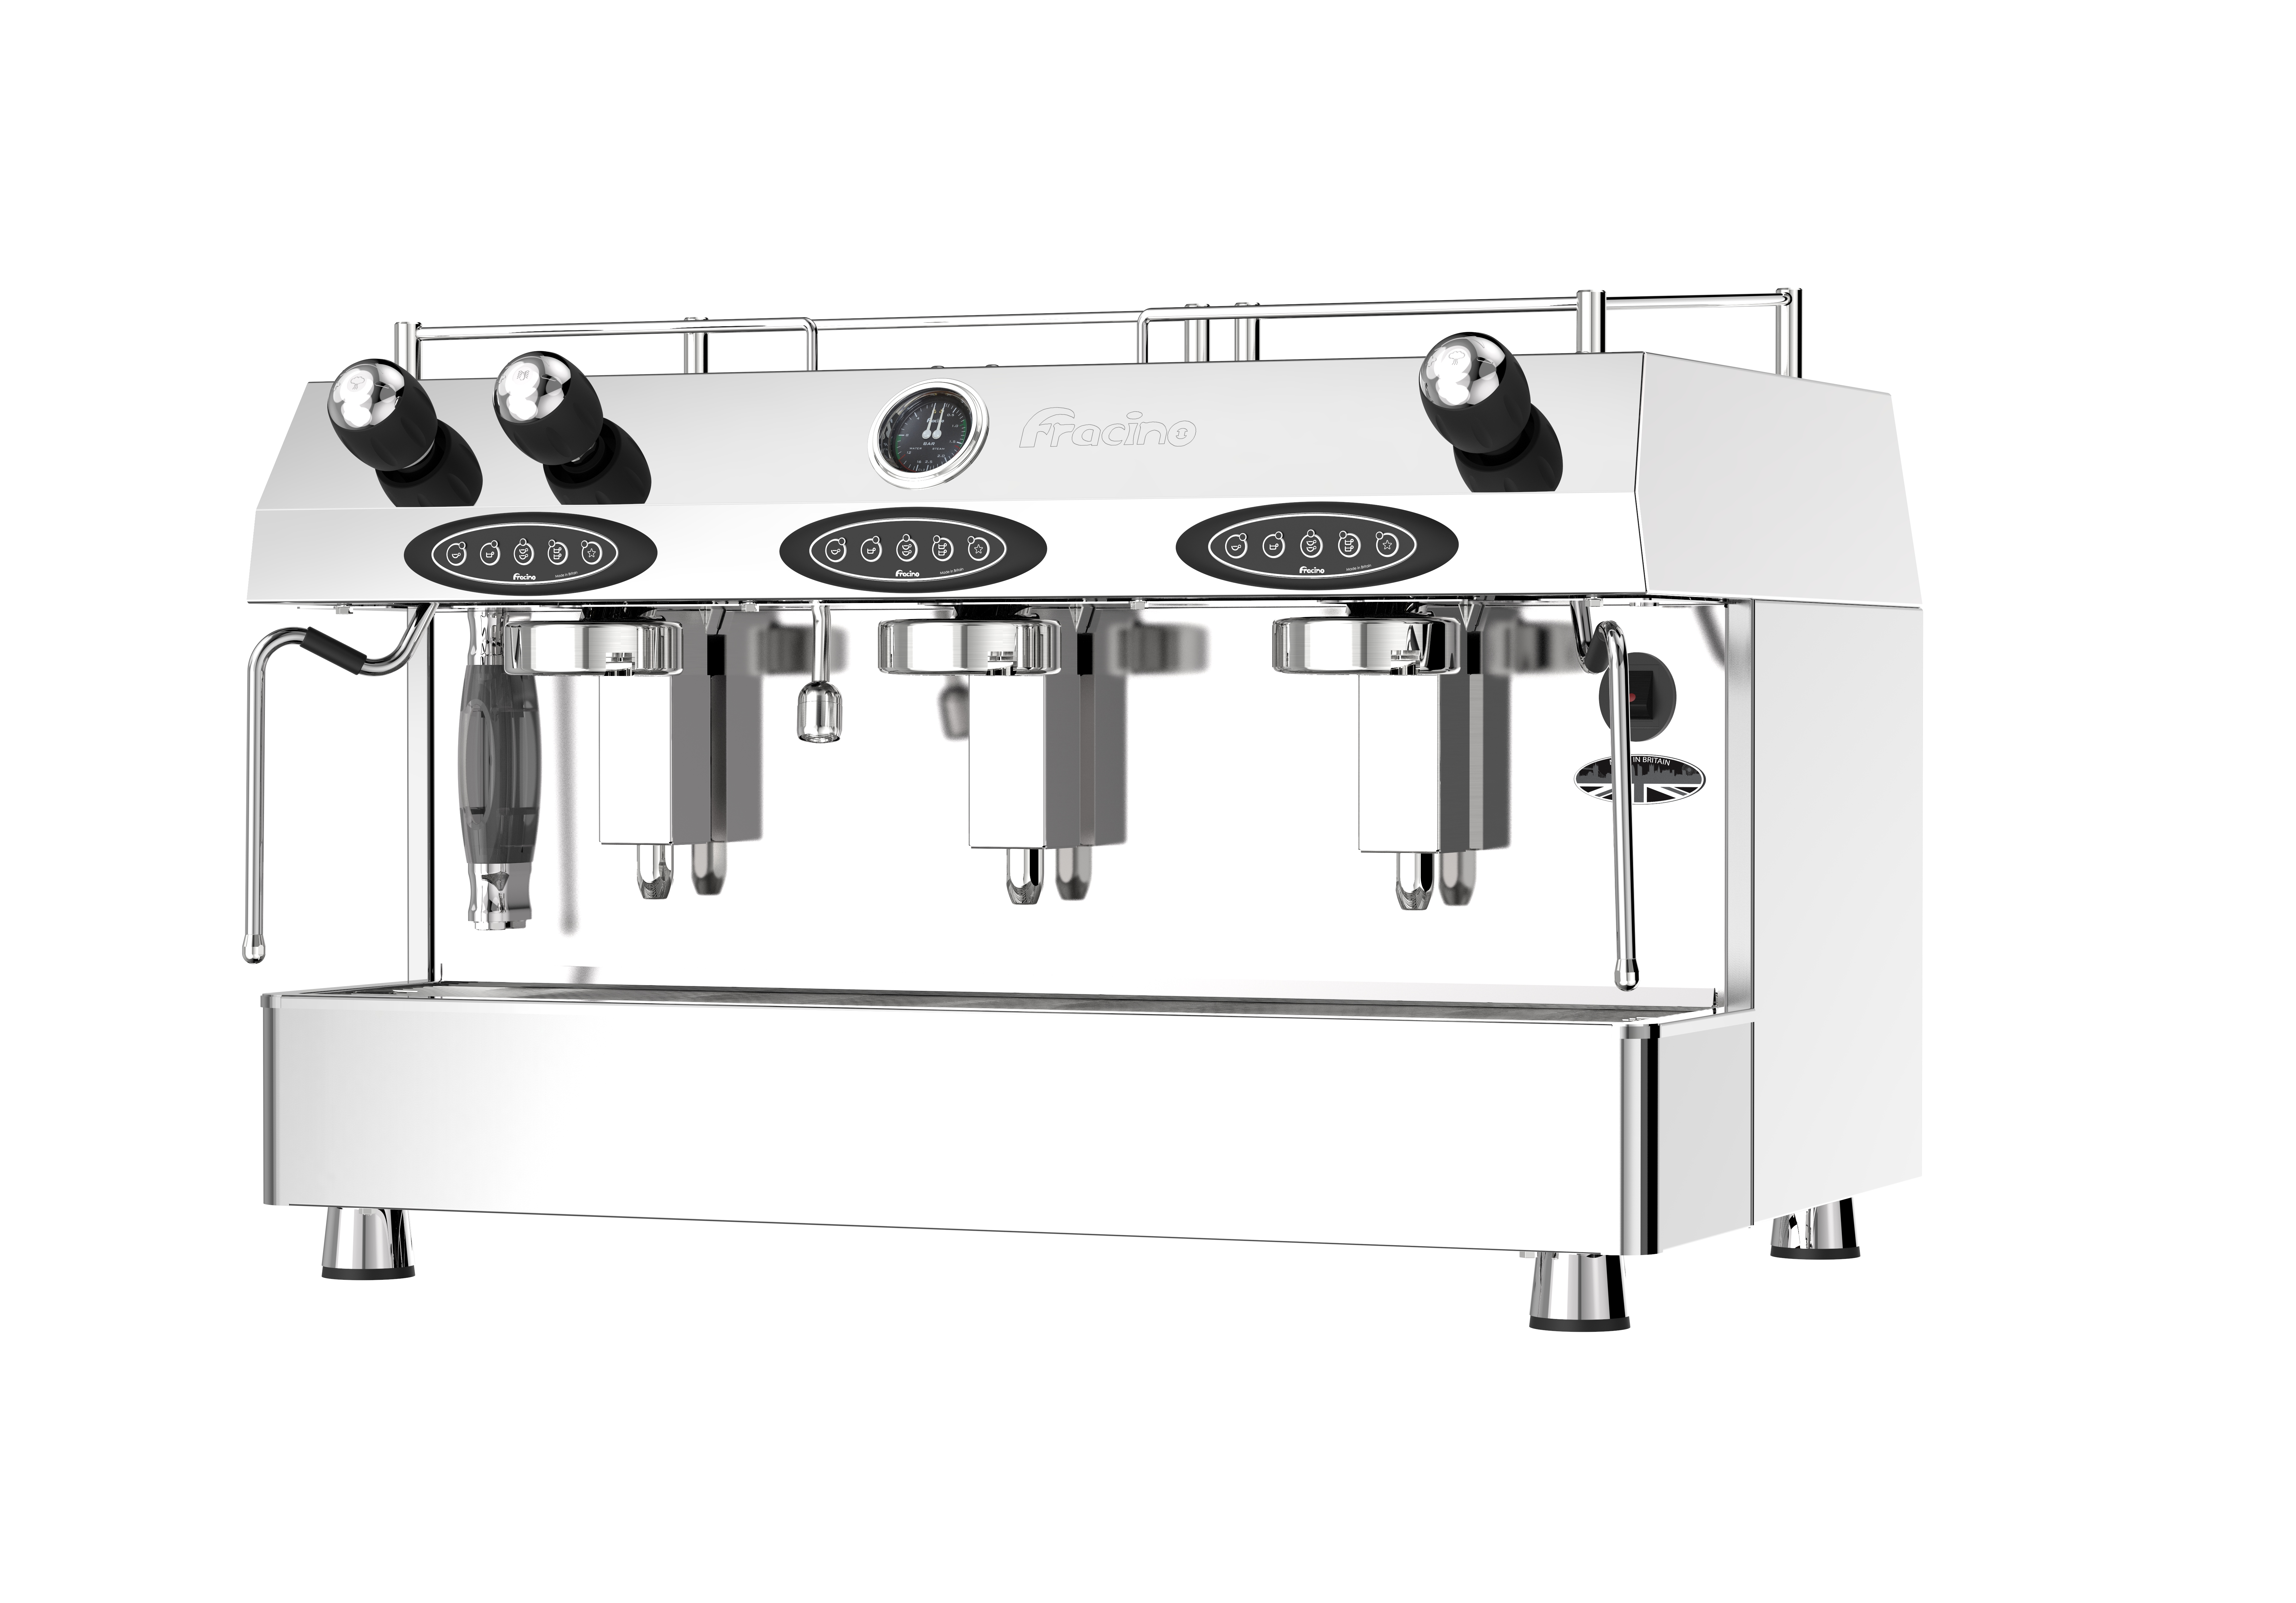 Fracino commercial coffee machine - Contempo 3 group